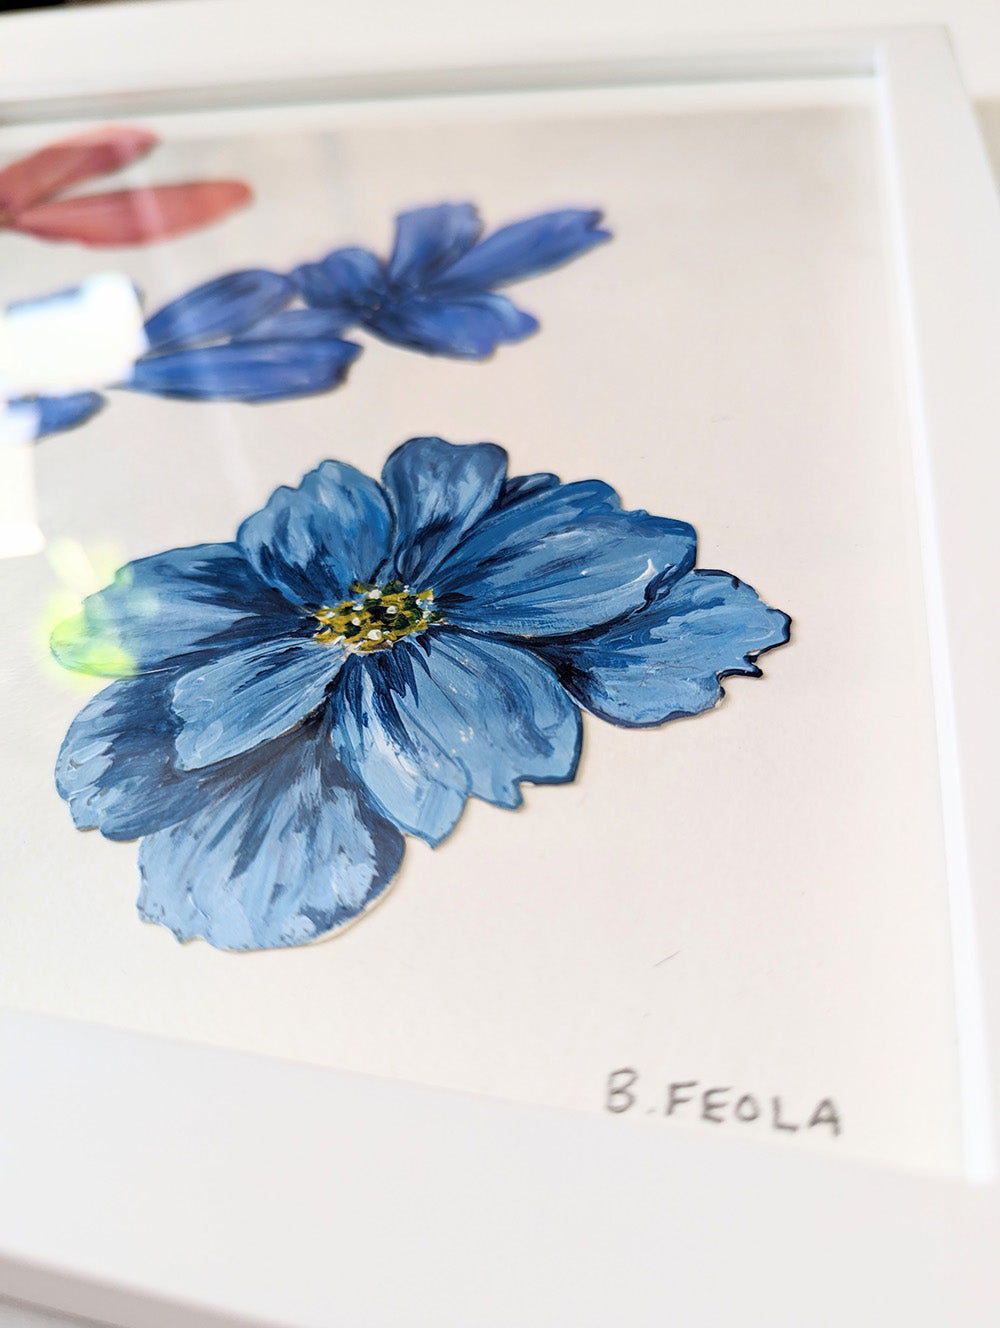 Floral Collage - Original Painting by Briana Feola